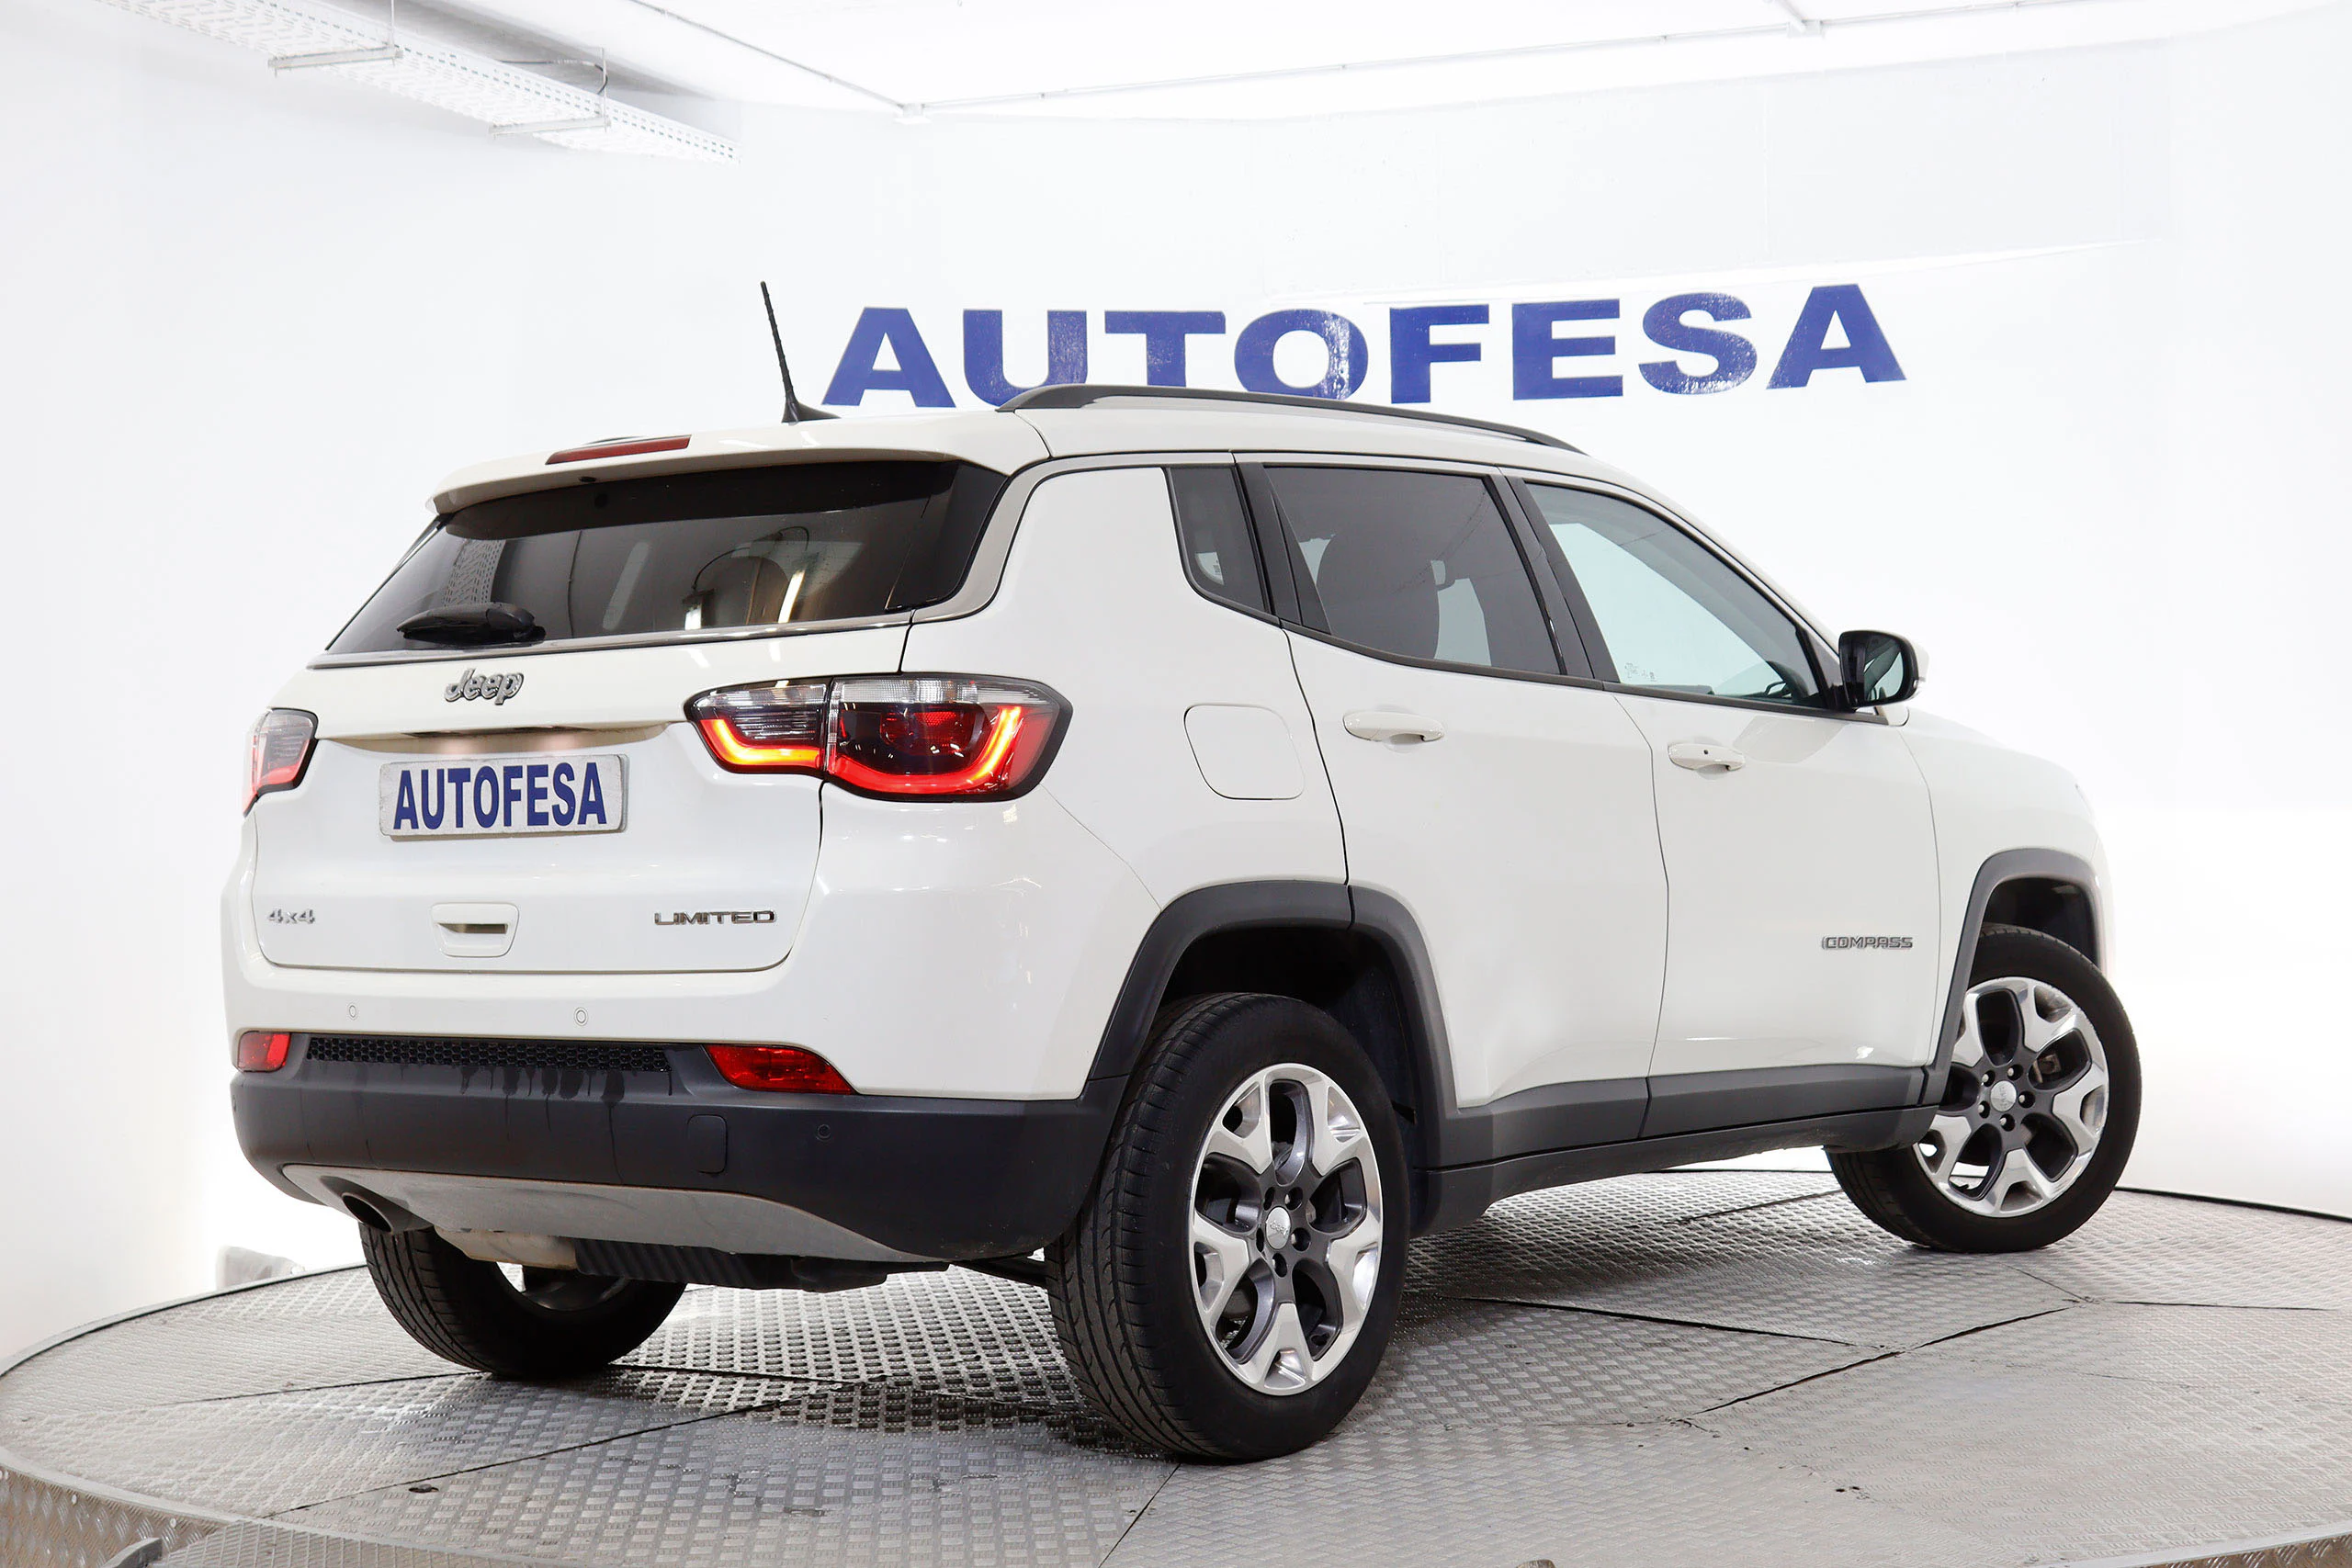 Jeep Compass 2.0 Limited 4X4 170cv Auto 5P S/S # IVA DEDUCIBLE, NAVY, FAROS LED, PARKTRONIC - Foto 6